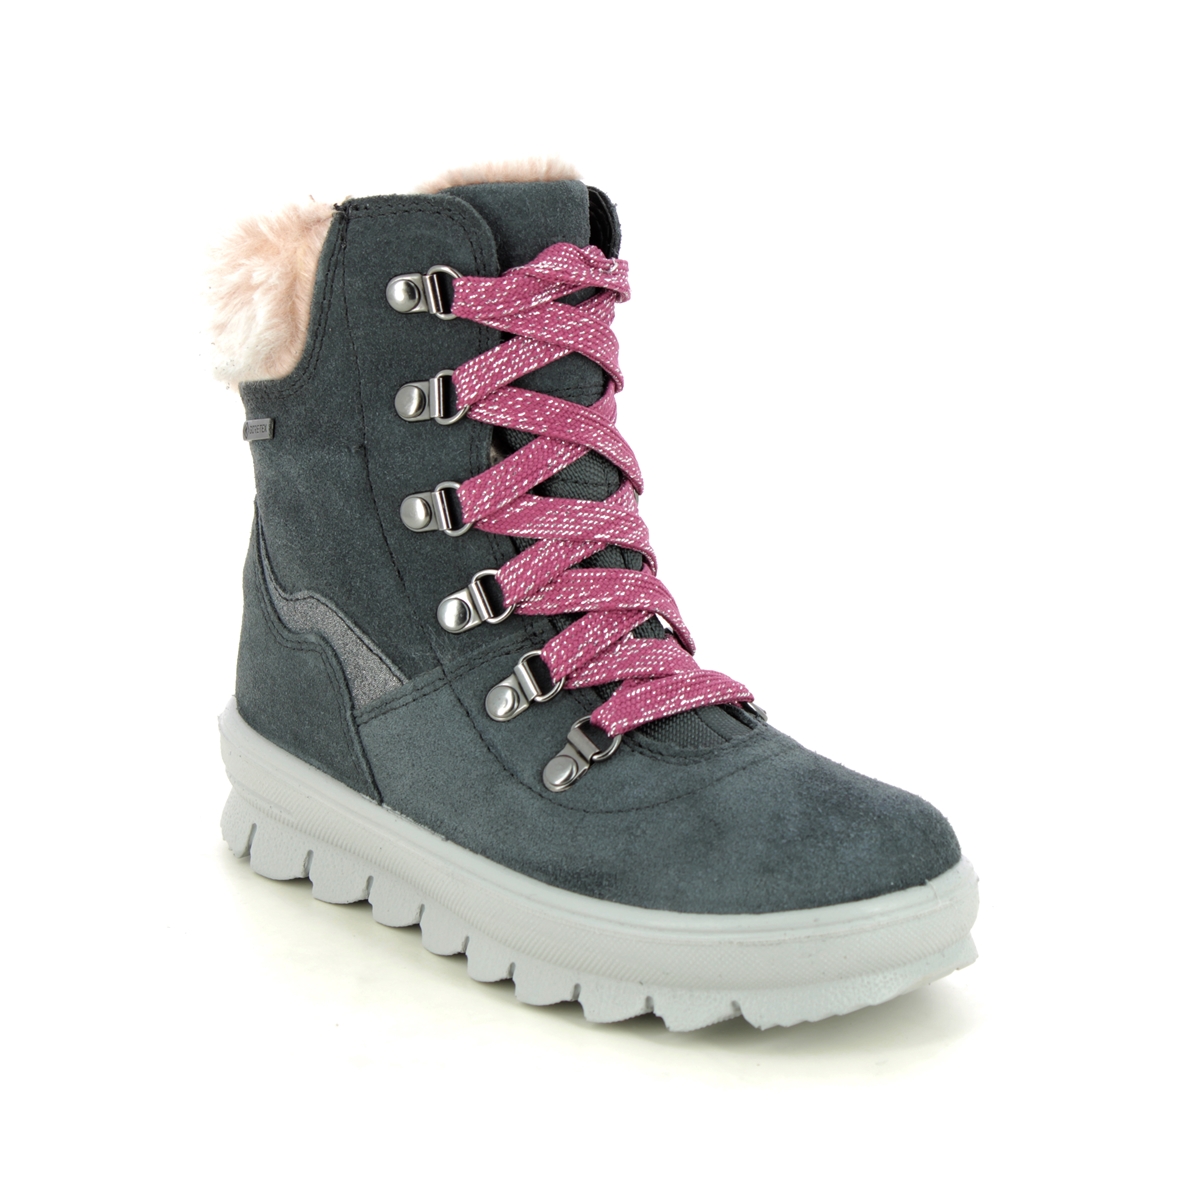 Superfit Flavia Lace Gtx Grey Suede Kids Girls Boots 1000220-2000 In Size 31 In Plain Grey Suede